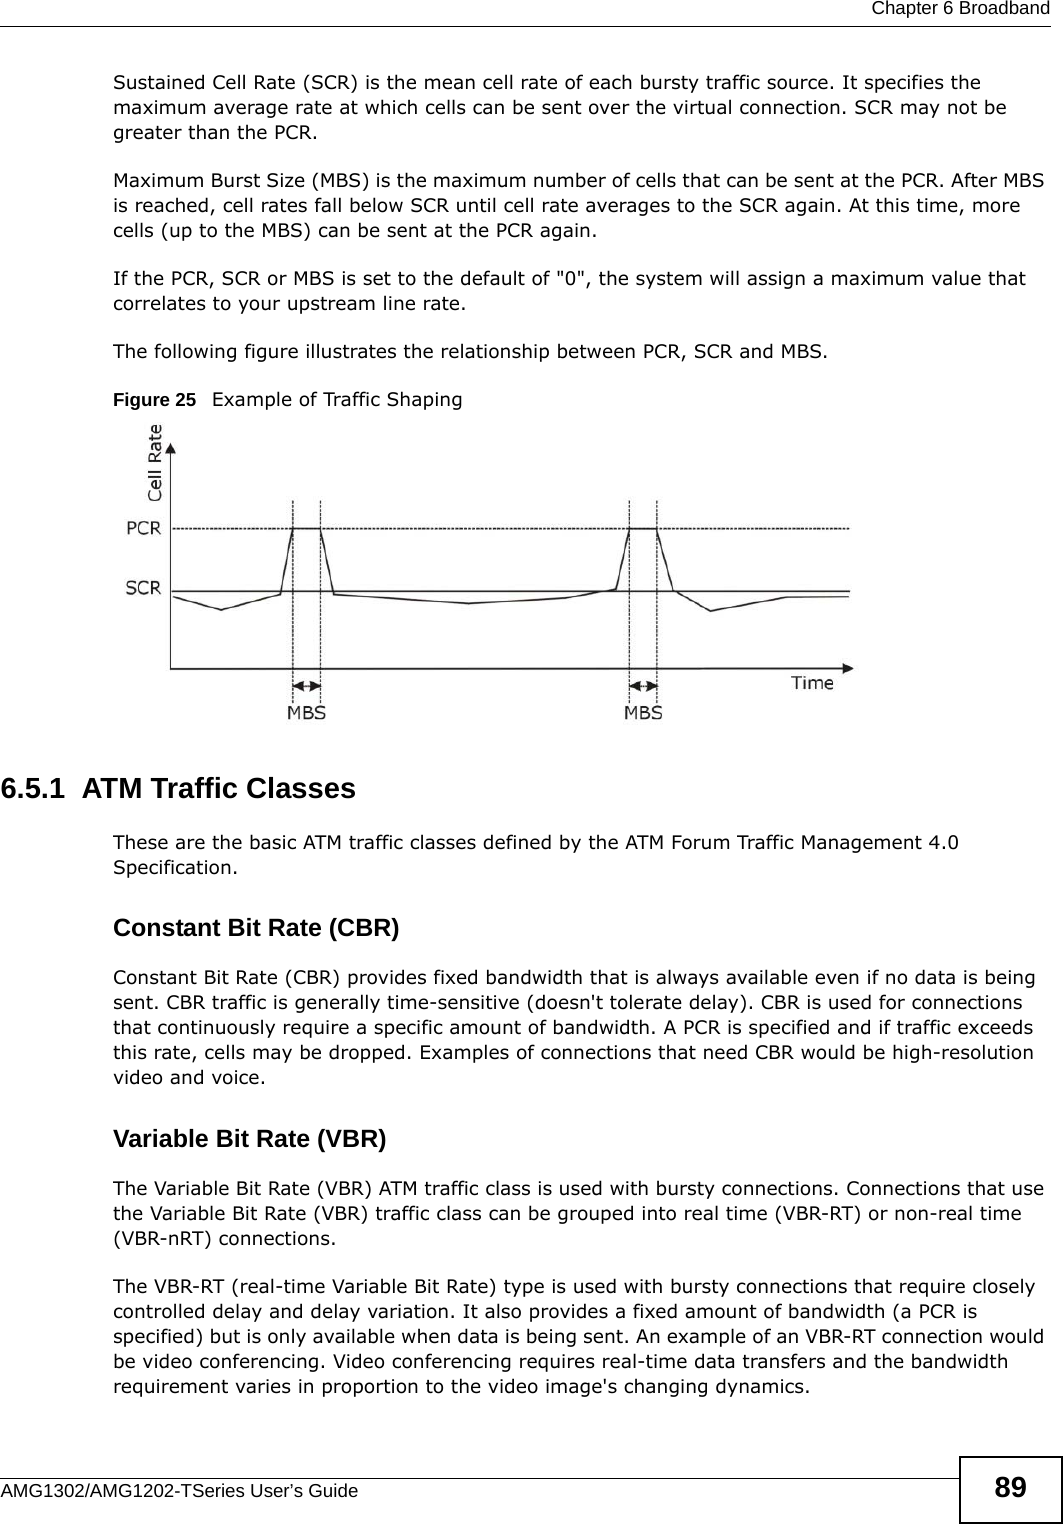  Chapter 6 BroadbandAMG1302/AMG1202-TSeries User’s Guide 89Sustained Cell Rate (SCR) is the mean cell rate of each bursty traffic source. It specifies the maximum average rate at which cells can be sent over the virtual connection. SCR may not be greater than the PCR.Maximum Burst Size (MBS) is the maximum number of cells that can be sent at the PCR. After MBS is reached, cell rates fall below SCR until cell rate averages to the SCR again. At this time, more cells (up to the MBS) can be sent at the PCR again.If the PCR, SCR or MBS is set to the default of &quot;0&quot;, the system will assign a maximum value that correlates to your upstream line rate. The following figure illustrates the relationship between PCR, SCR and MBS. Figure 25   Example of Traffic Shaping6.5.1  ATM Traffic ClassesThese are the basic ATM traffic classes defined by the ATM Forum Traffic Management 4.0 Specification. Constant Bit Rate (CBR)Constant Bit Rate (CBR) provides fixed bandwidth that is always available even if no data is being sent. CBR traffic is generally time-sensitive (doesn&apos;t tolerate delay). CBR is used for connections that continuously require a specific amount of bandwidth. A PCR is specified and if traffic exceeds this rate, cells may be dropped. Examples of connections that need CBR would be high-resolution video and voice.Variable Bit Rate (VBR) The Variable Bit Rate (VBR) ATM traffic class is used with bursty connections. Connections that use the Variable Bit Rate (VBR) traffic class can be grouped into real time (VBR-RT) or non-real time (VBR-nRT) connections. The VBR-RT (real-time Variable Bit Rate) type is used with bursty connections that require closely controlled delay and delay variation. It also provides a fixed amount of bandwidth (a PCR is specified) but is only available when data is being sent. An example of an VBR-RT connection would be video conferencing. Video conferencing requires real-time data transfers and the bandwidth requirement varies in proportion to the video image&apos;s changing dynamics. 